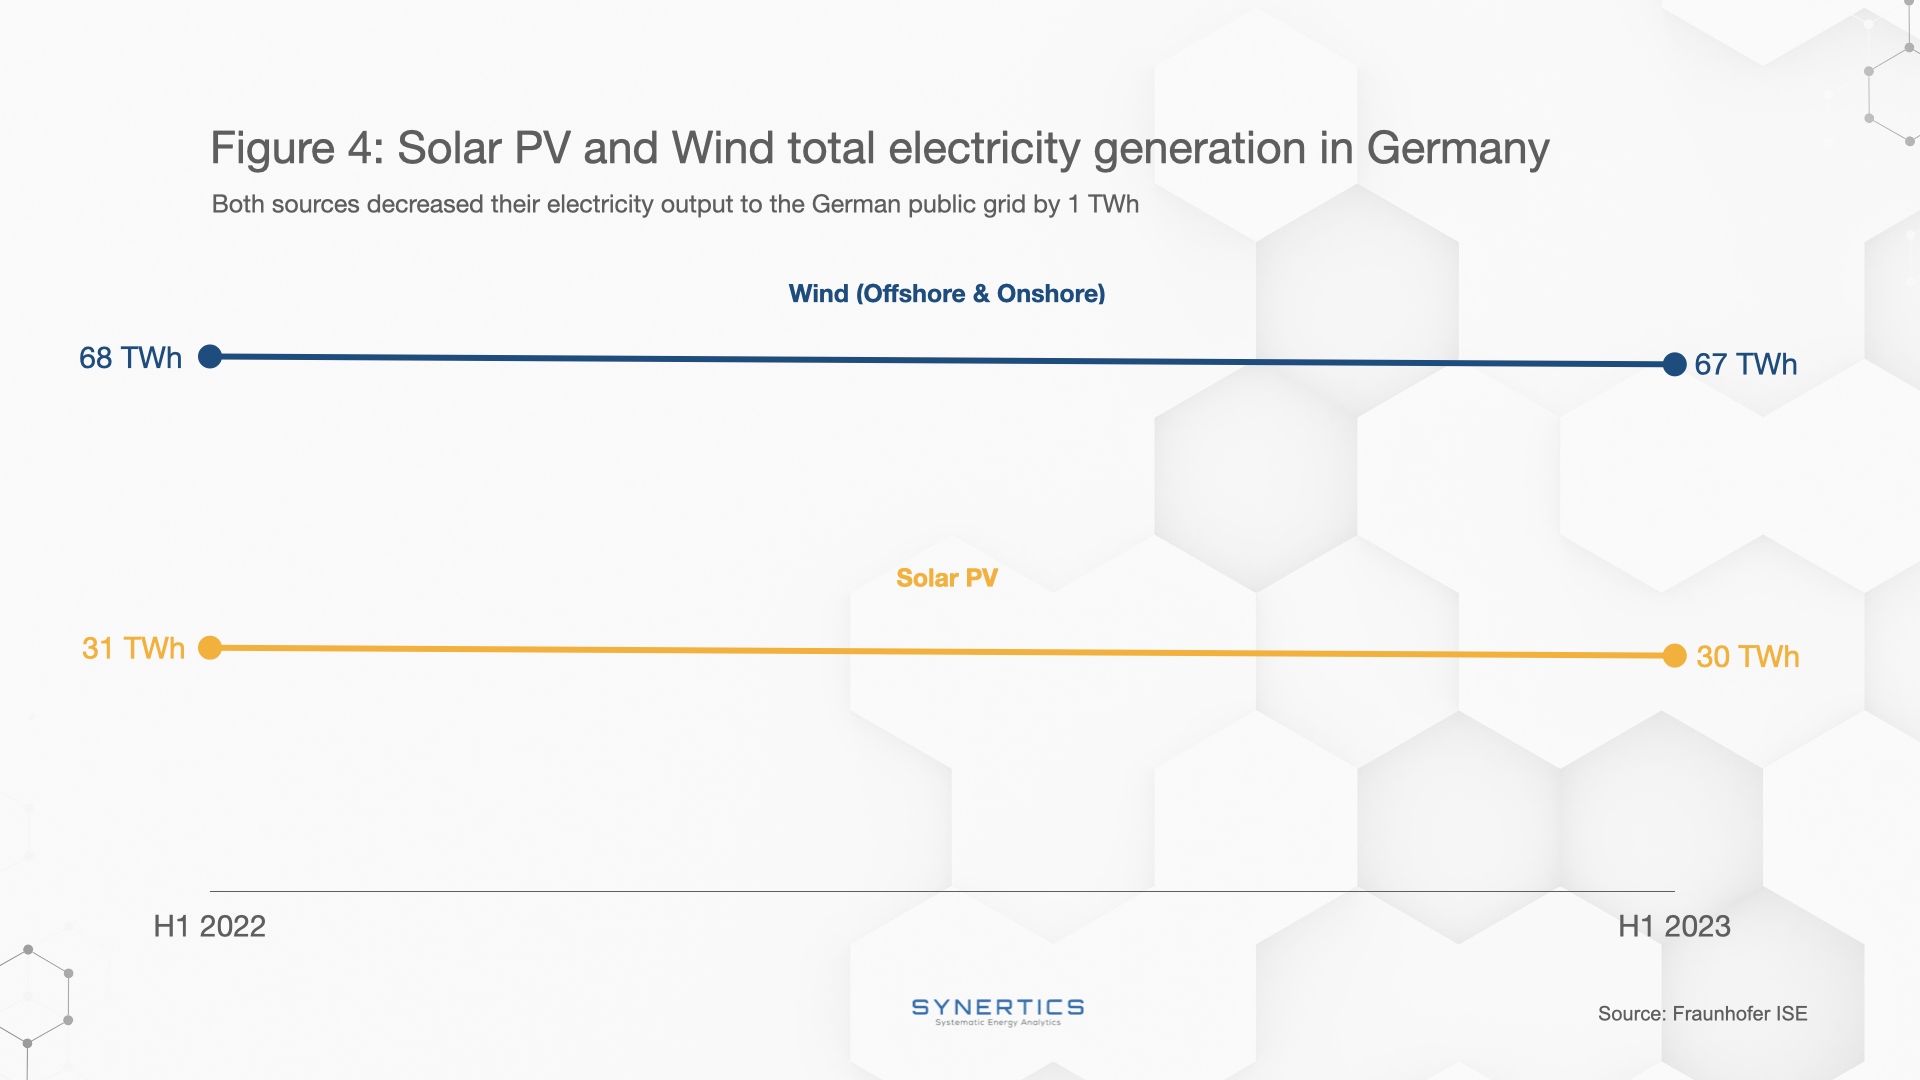 Solar PV and Wind total electricity generation in Germany